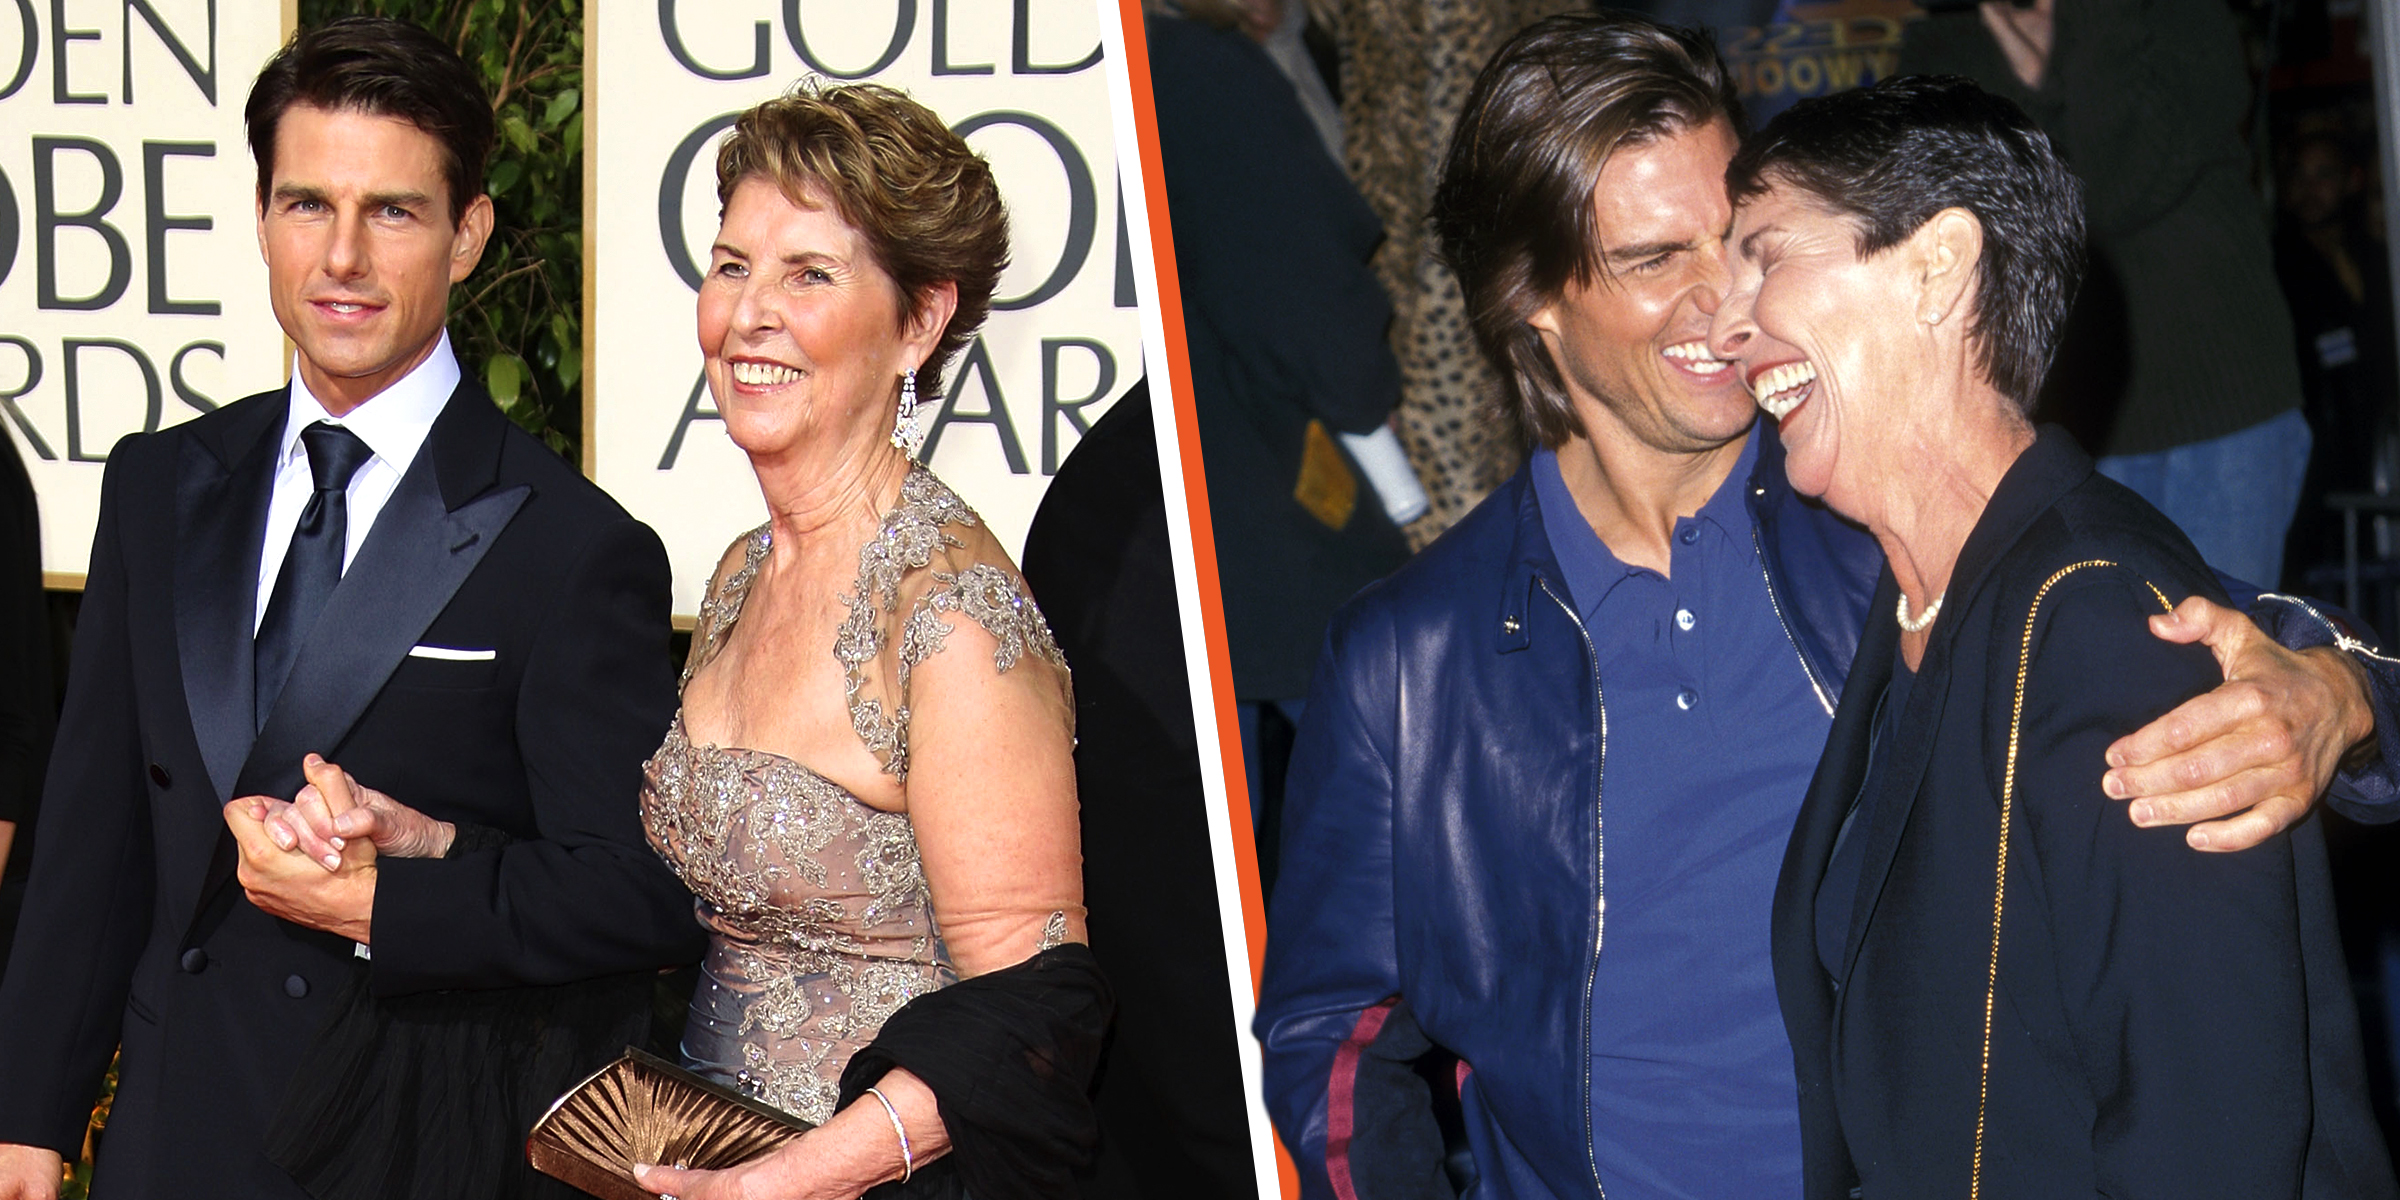 Tom Cruise und Mary Lee Pfeiffer | Quelle: Getty Images